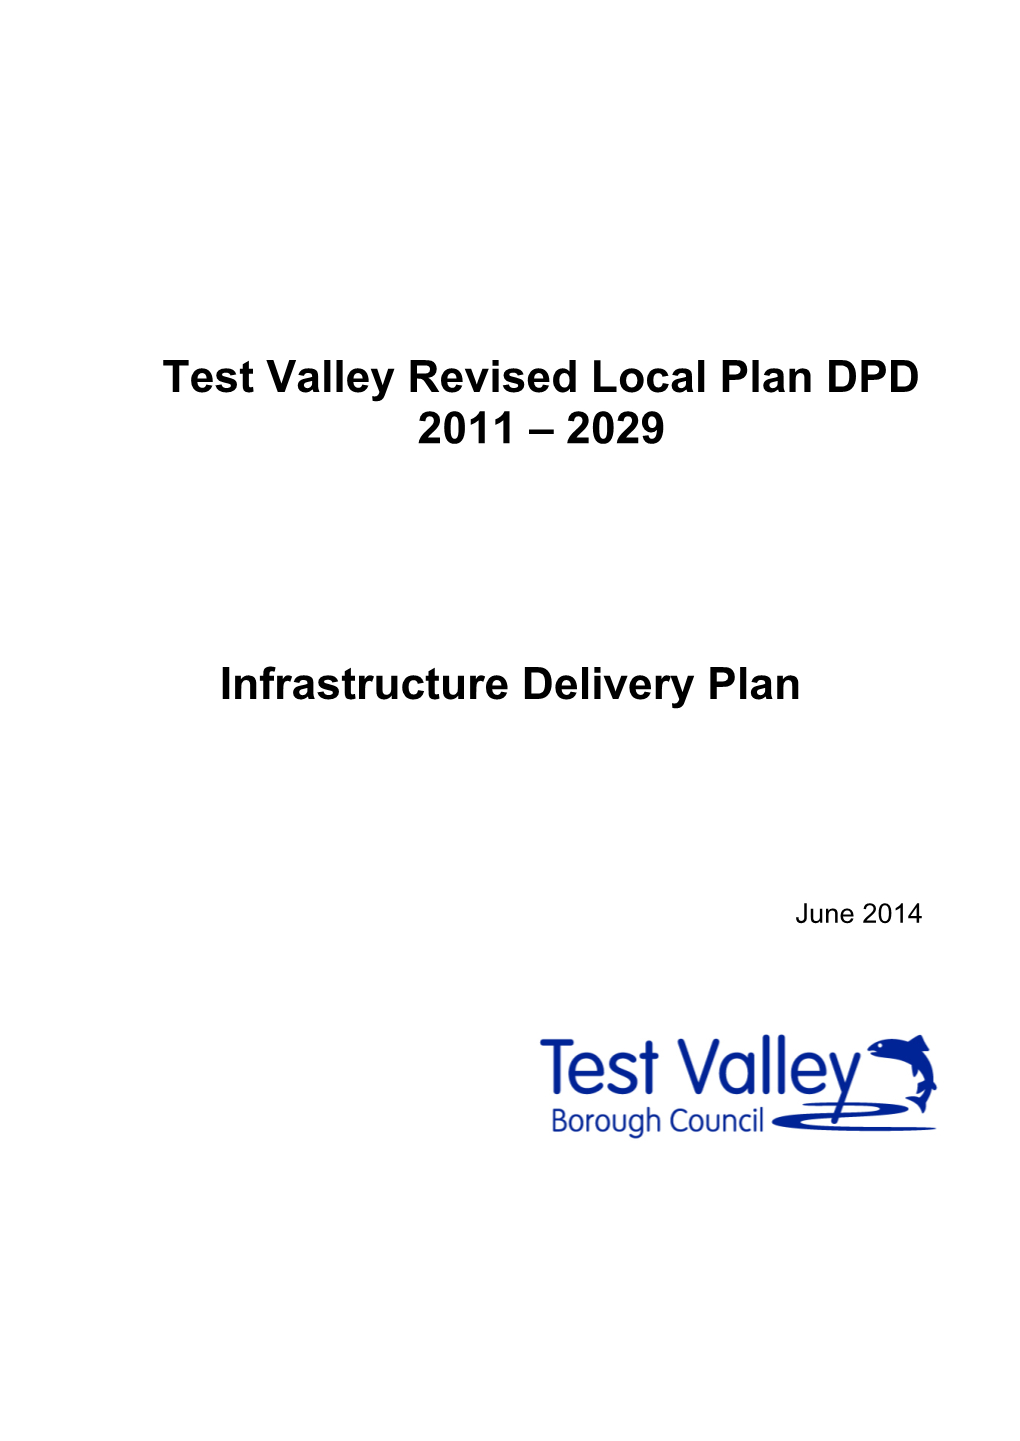 Test Valley Revised Local Plan DPD 2011 – 2029 Infrastructure Delivery